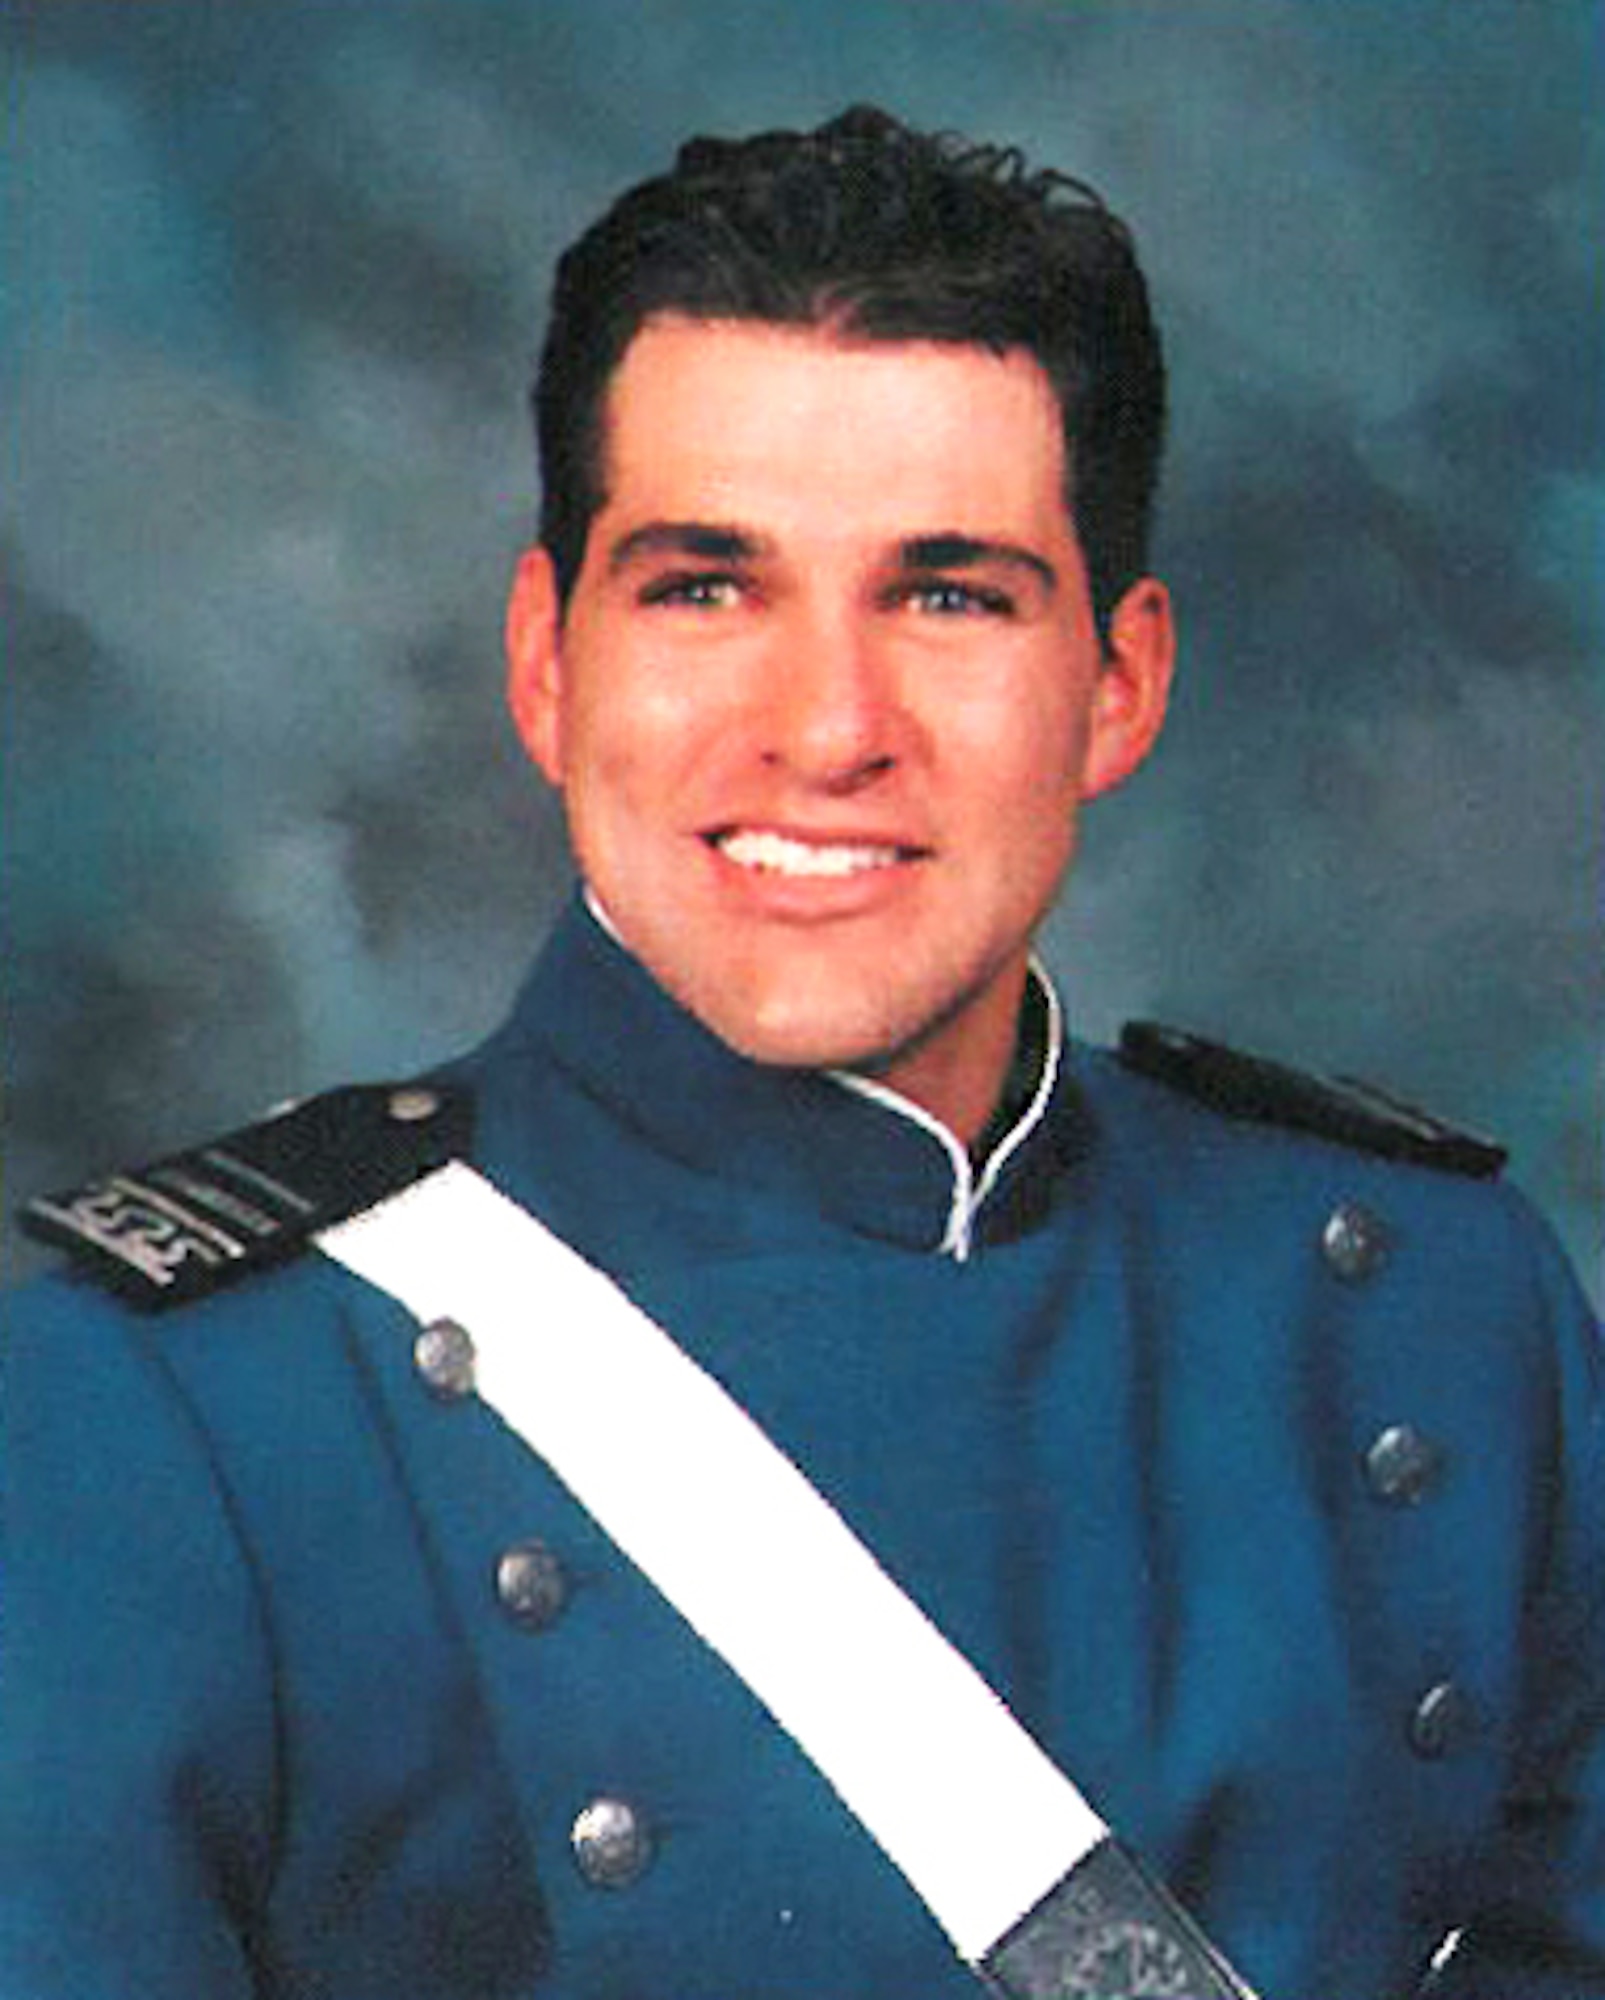 Maj. David Brodeur, USAFA class of 1999, was killed in Kabul, Afghanistan Wednesday, April 27, 2011. Major Brodeur was serving on a NATO team training the Afghan Air Force in support of Operation Enduring Freedom. 